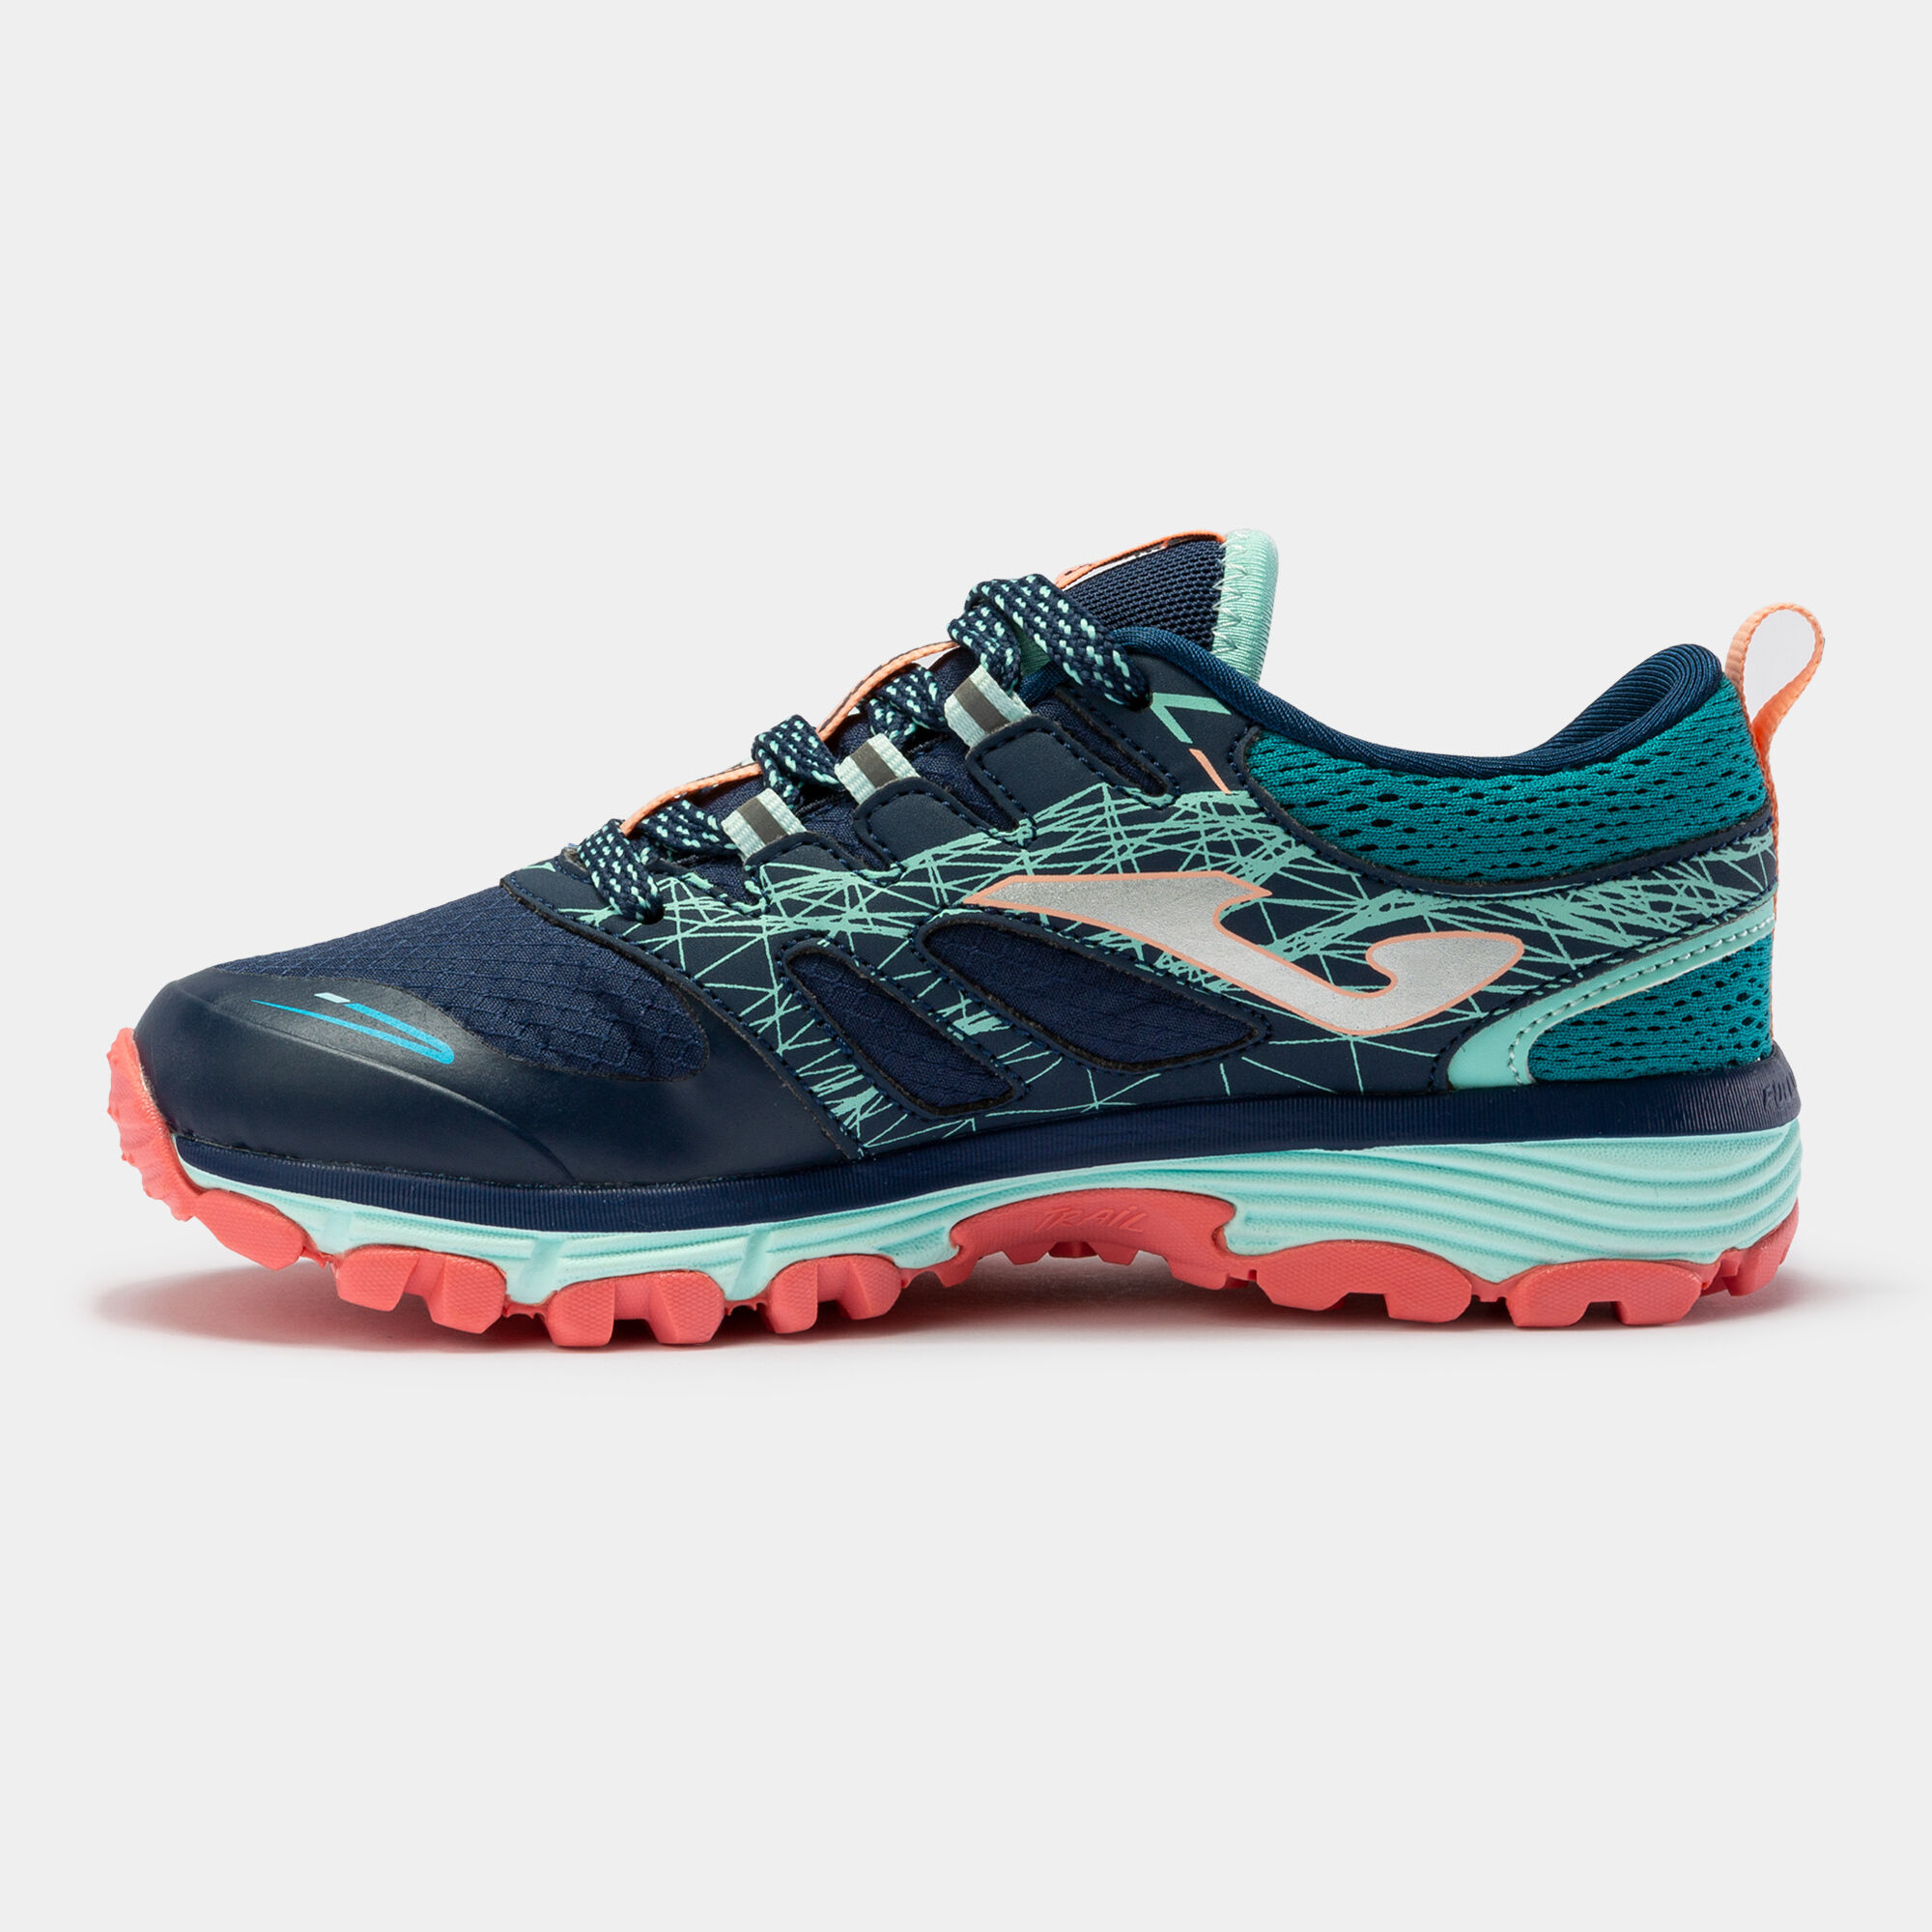 TRAIL-RUNNING SHOES SIMA 22 JUNIOR NAVY BLUE TURQUOISE